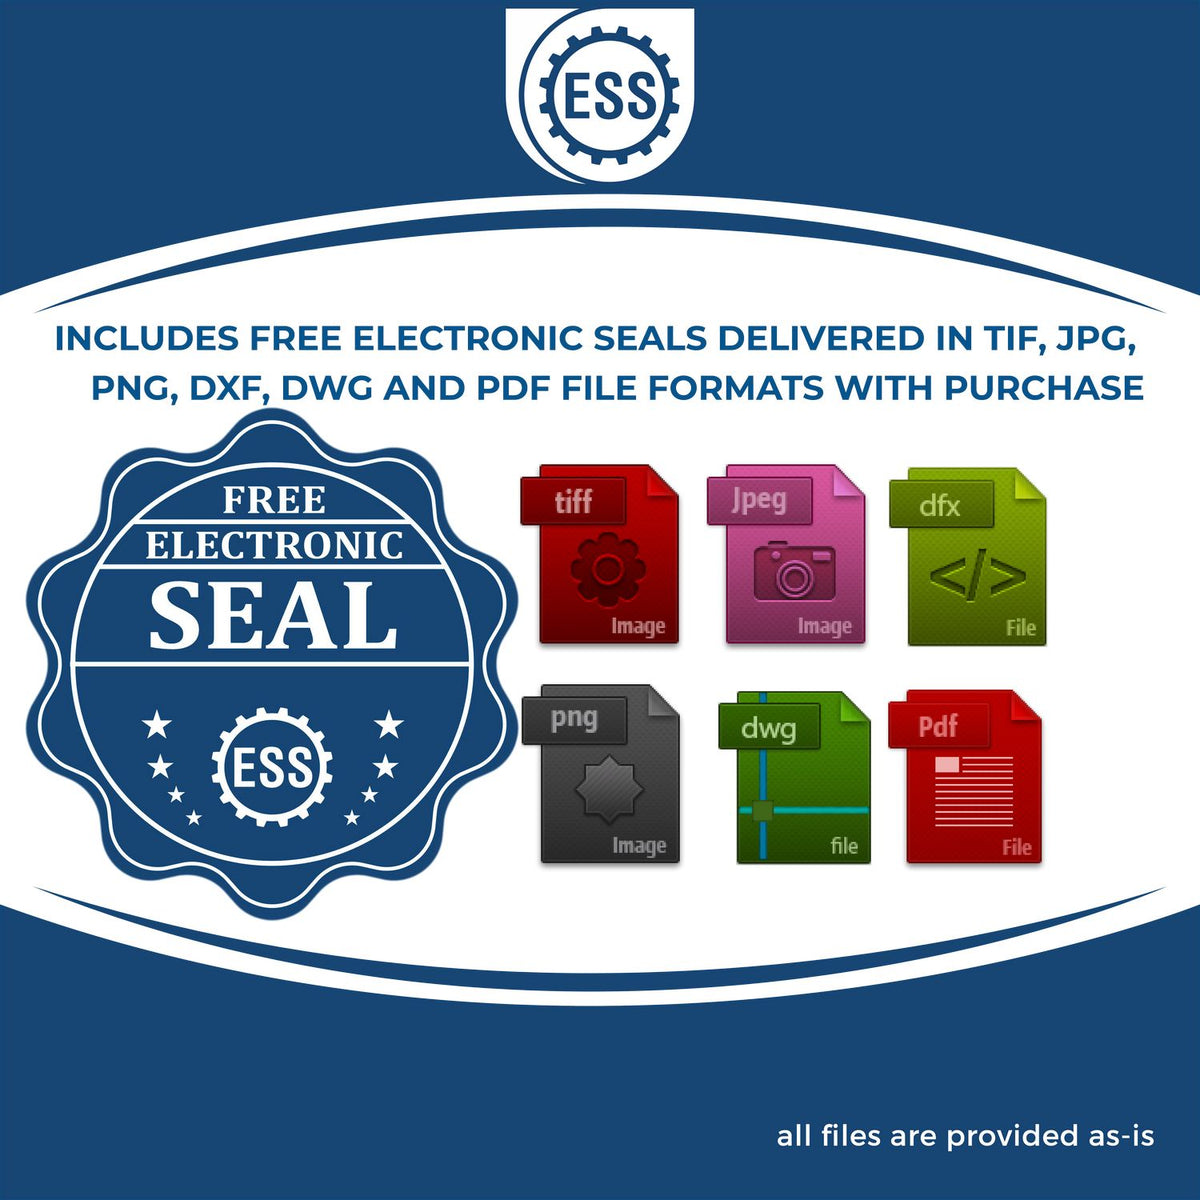 An infographic for the free electronic seal for the Georgia Professional Engineer Seal Stamp illustrating the different file type icons such as DXF, DWG, TIF, JPG and PNG.